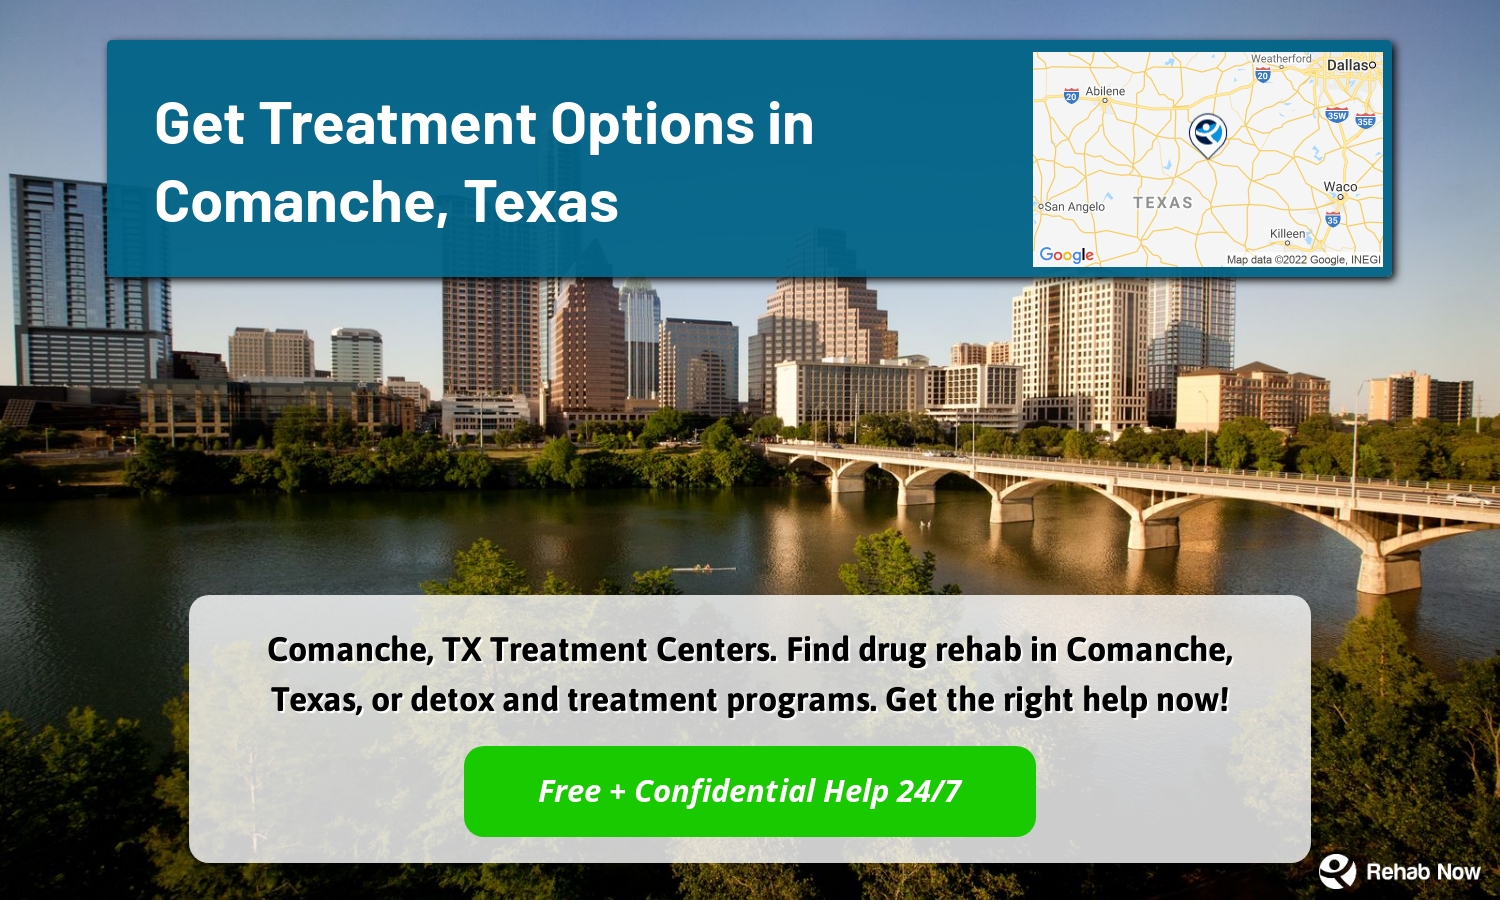 Comanche, TX Treatment Centers. Find drug rehab in Comanche, Texas, or detox and treatment programs. Get the right help now!